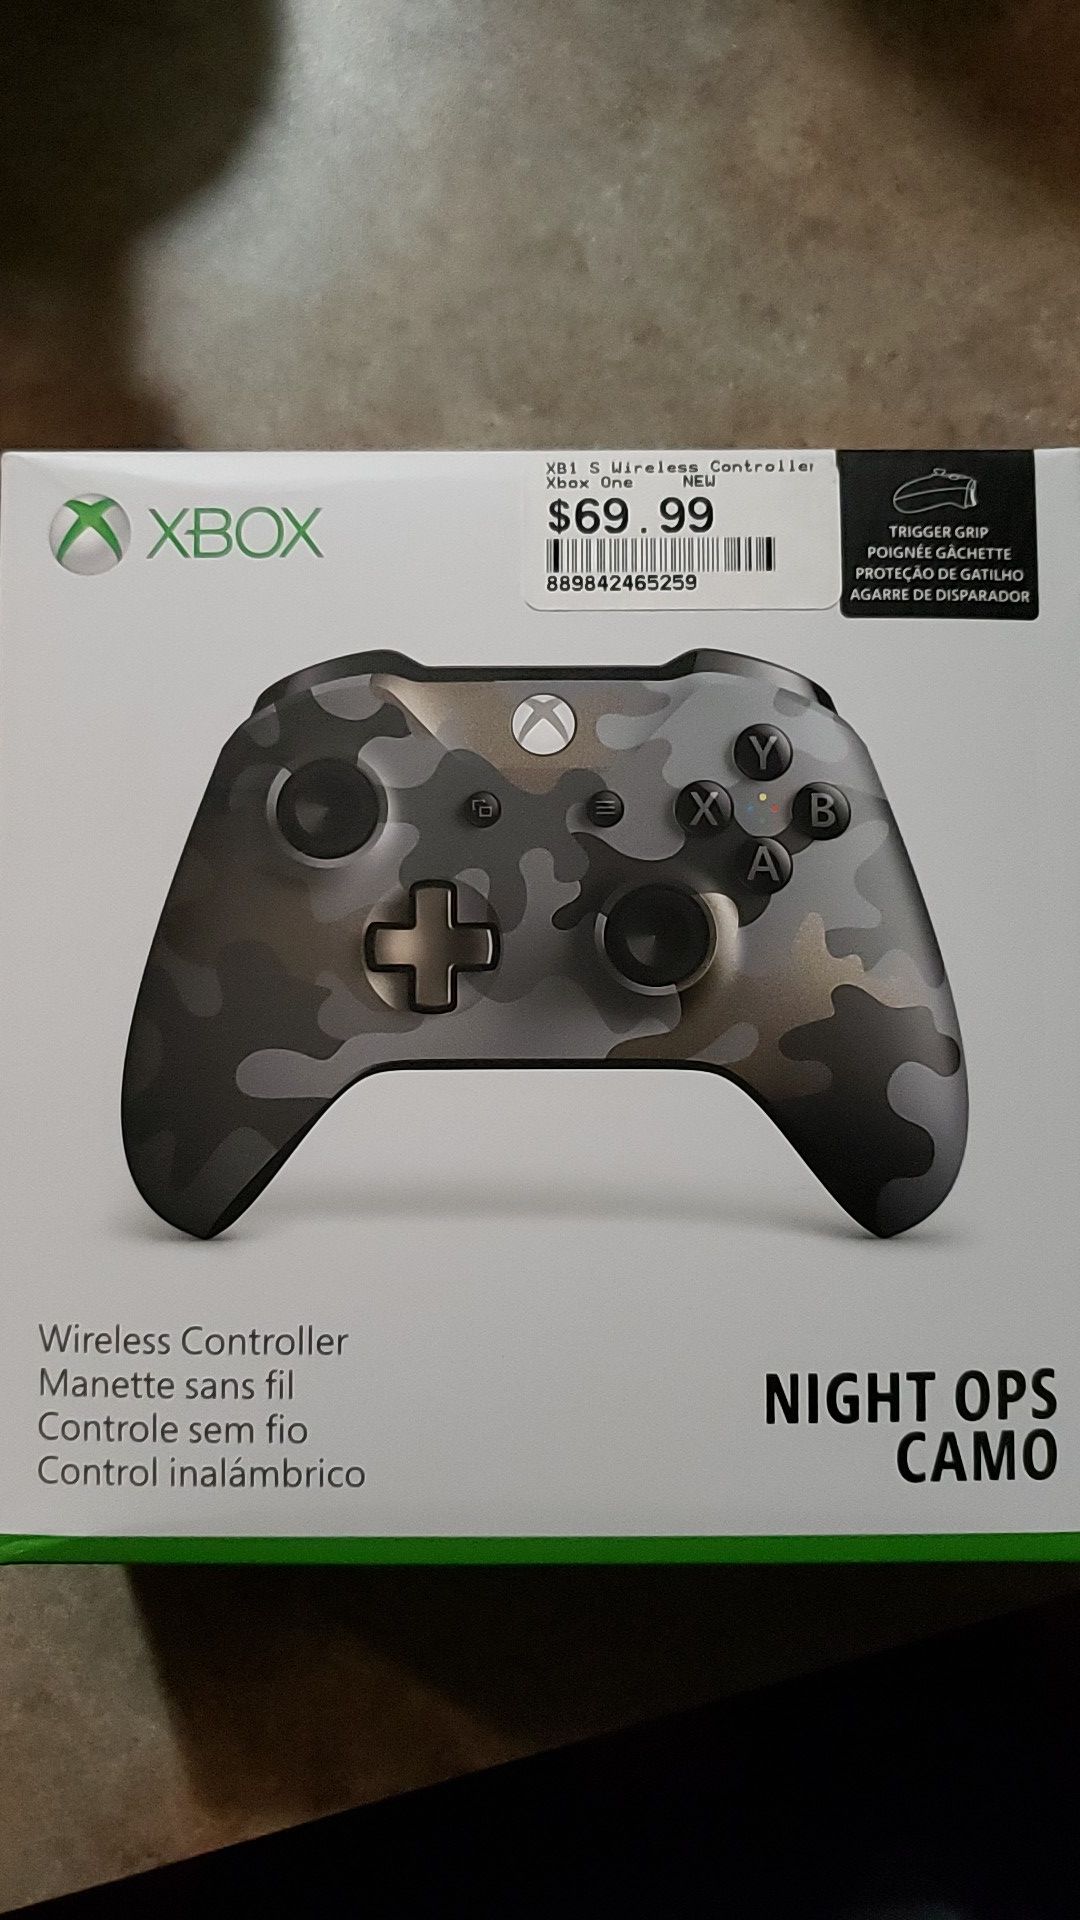 Xbox One Night Ops Camo Wireless Controller